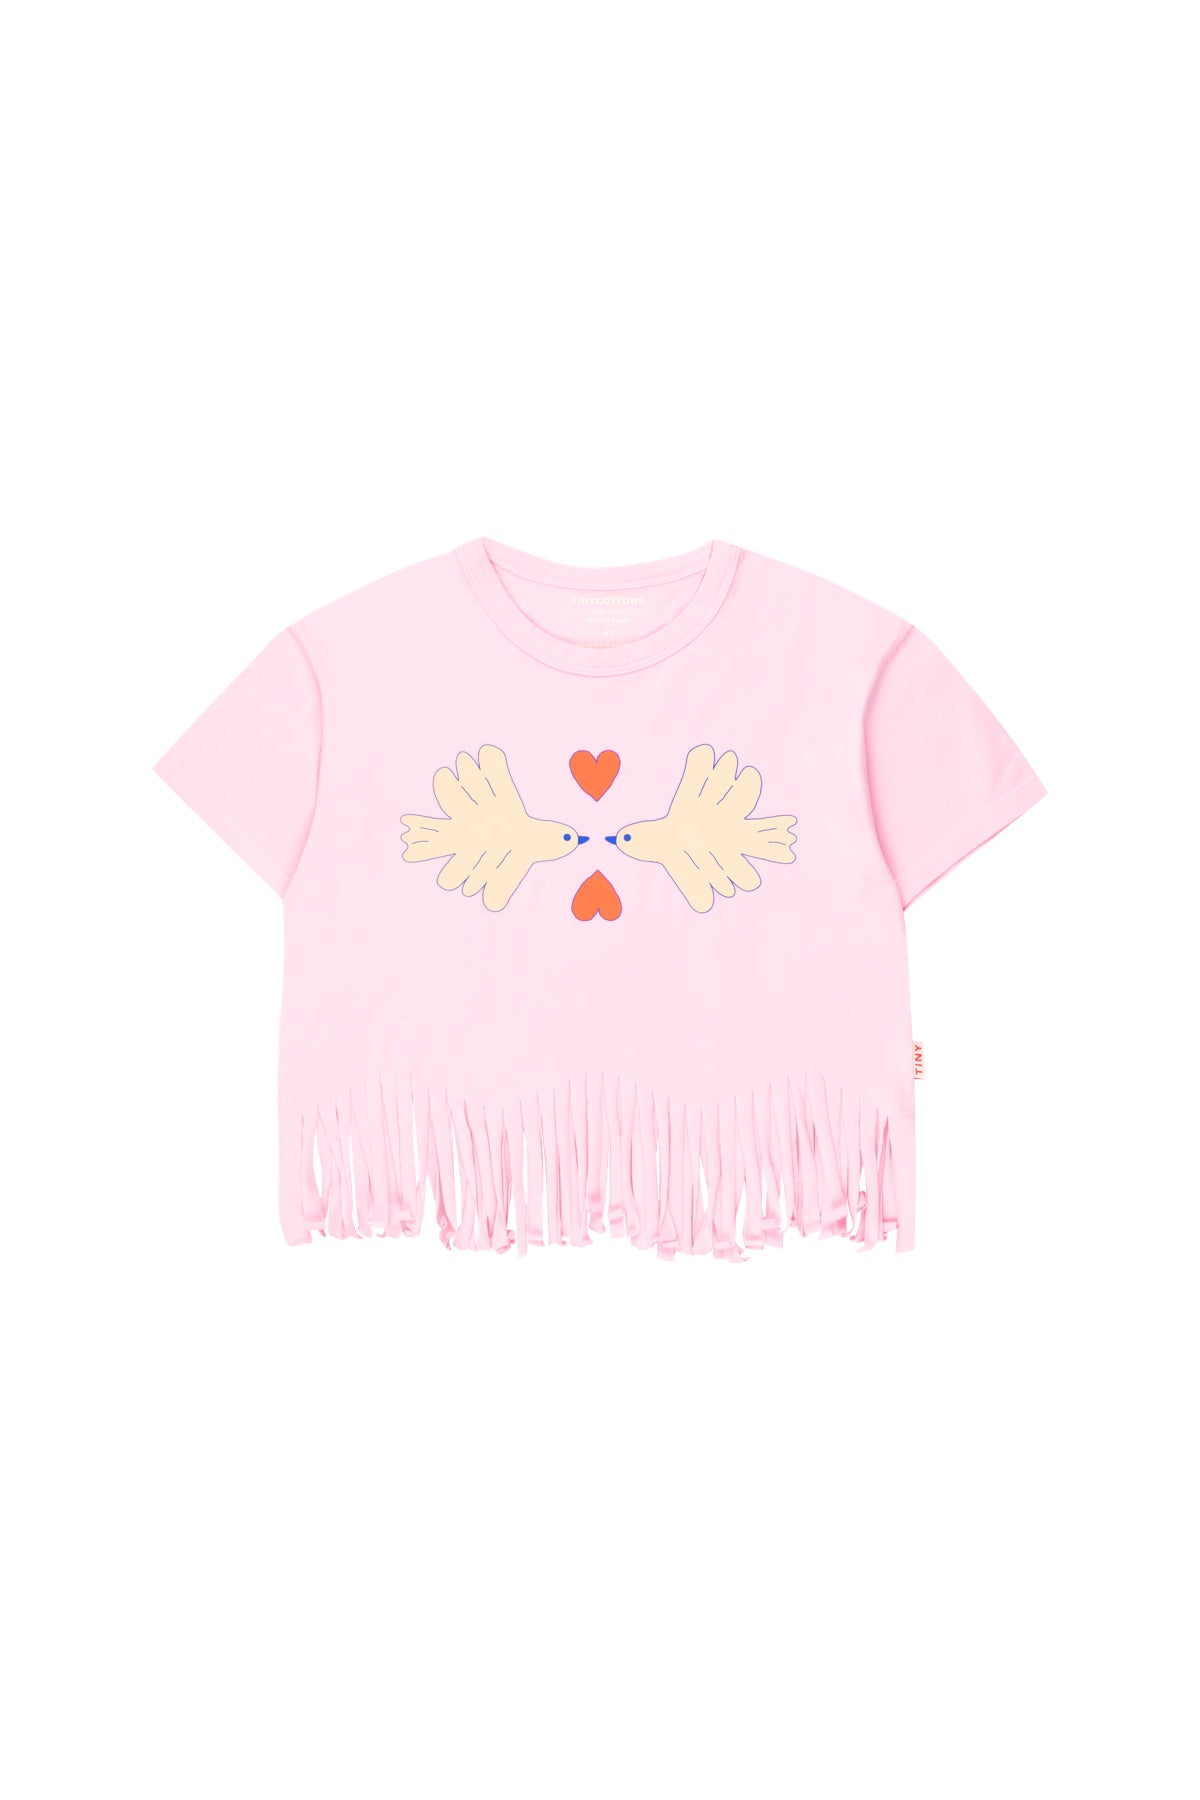 Tiny Cottons Doves Tee - Light Pink